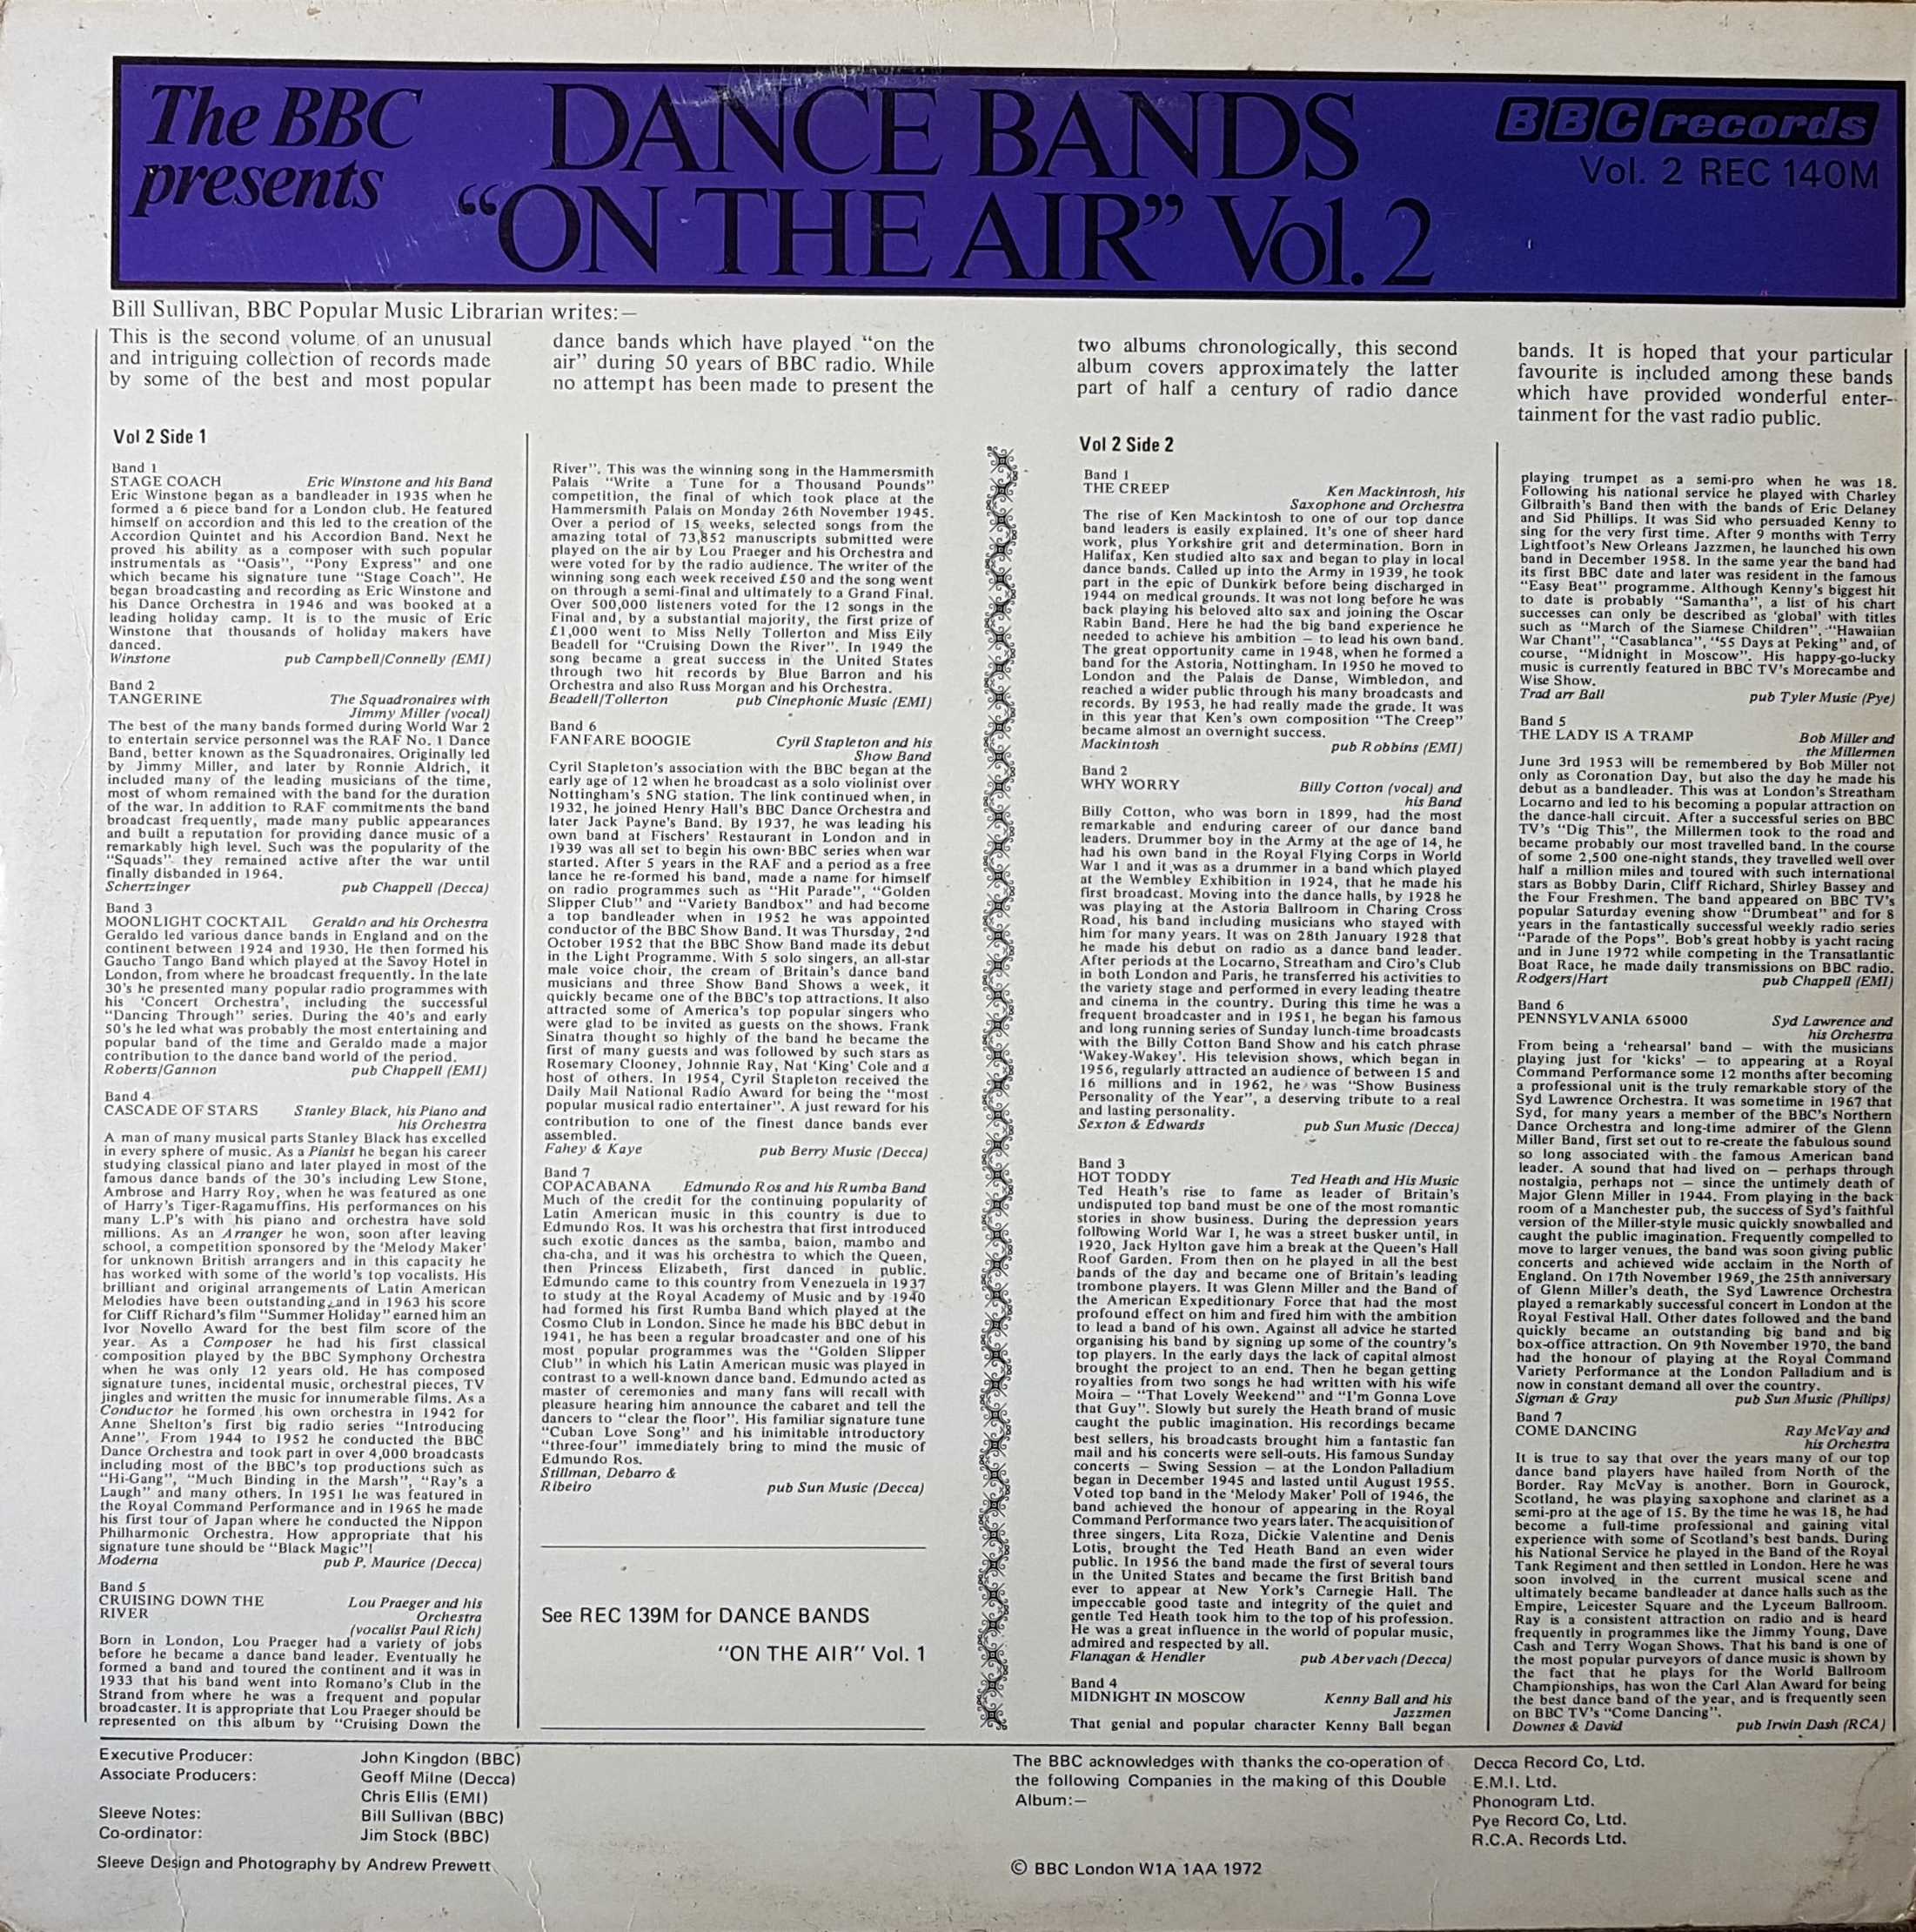 Picture of REC 140 Dance bands on the air - Volume 2 by artist Various from the BBC records and Tapes library